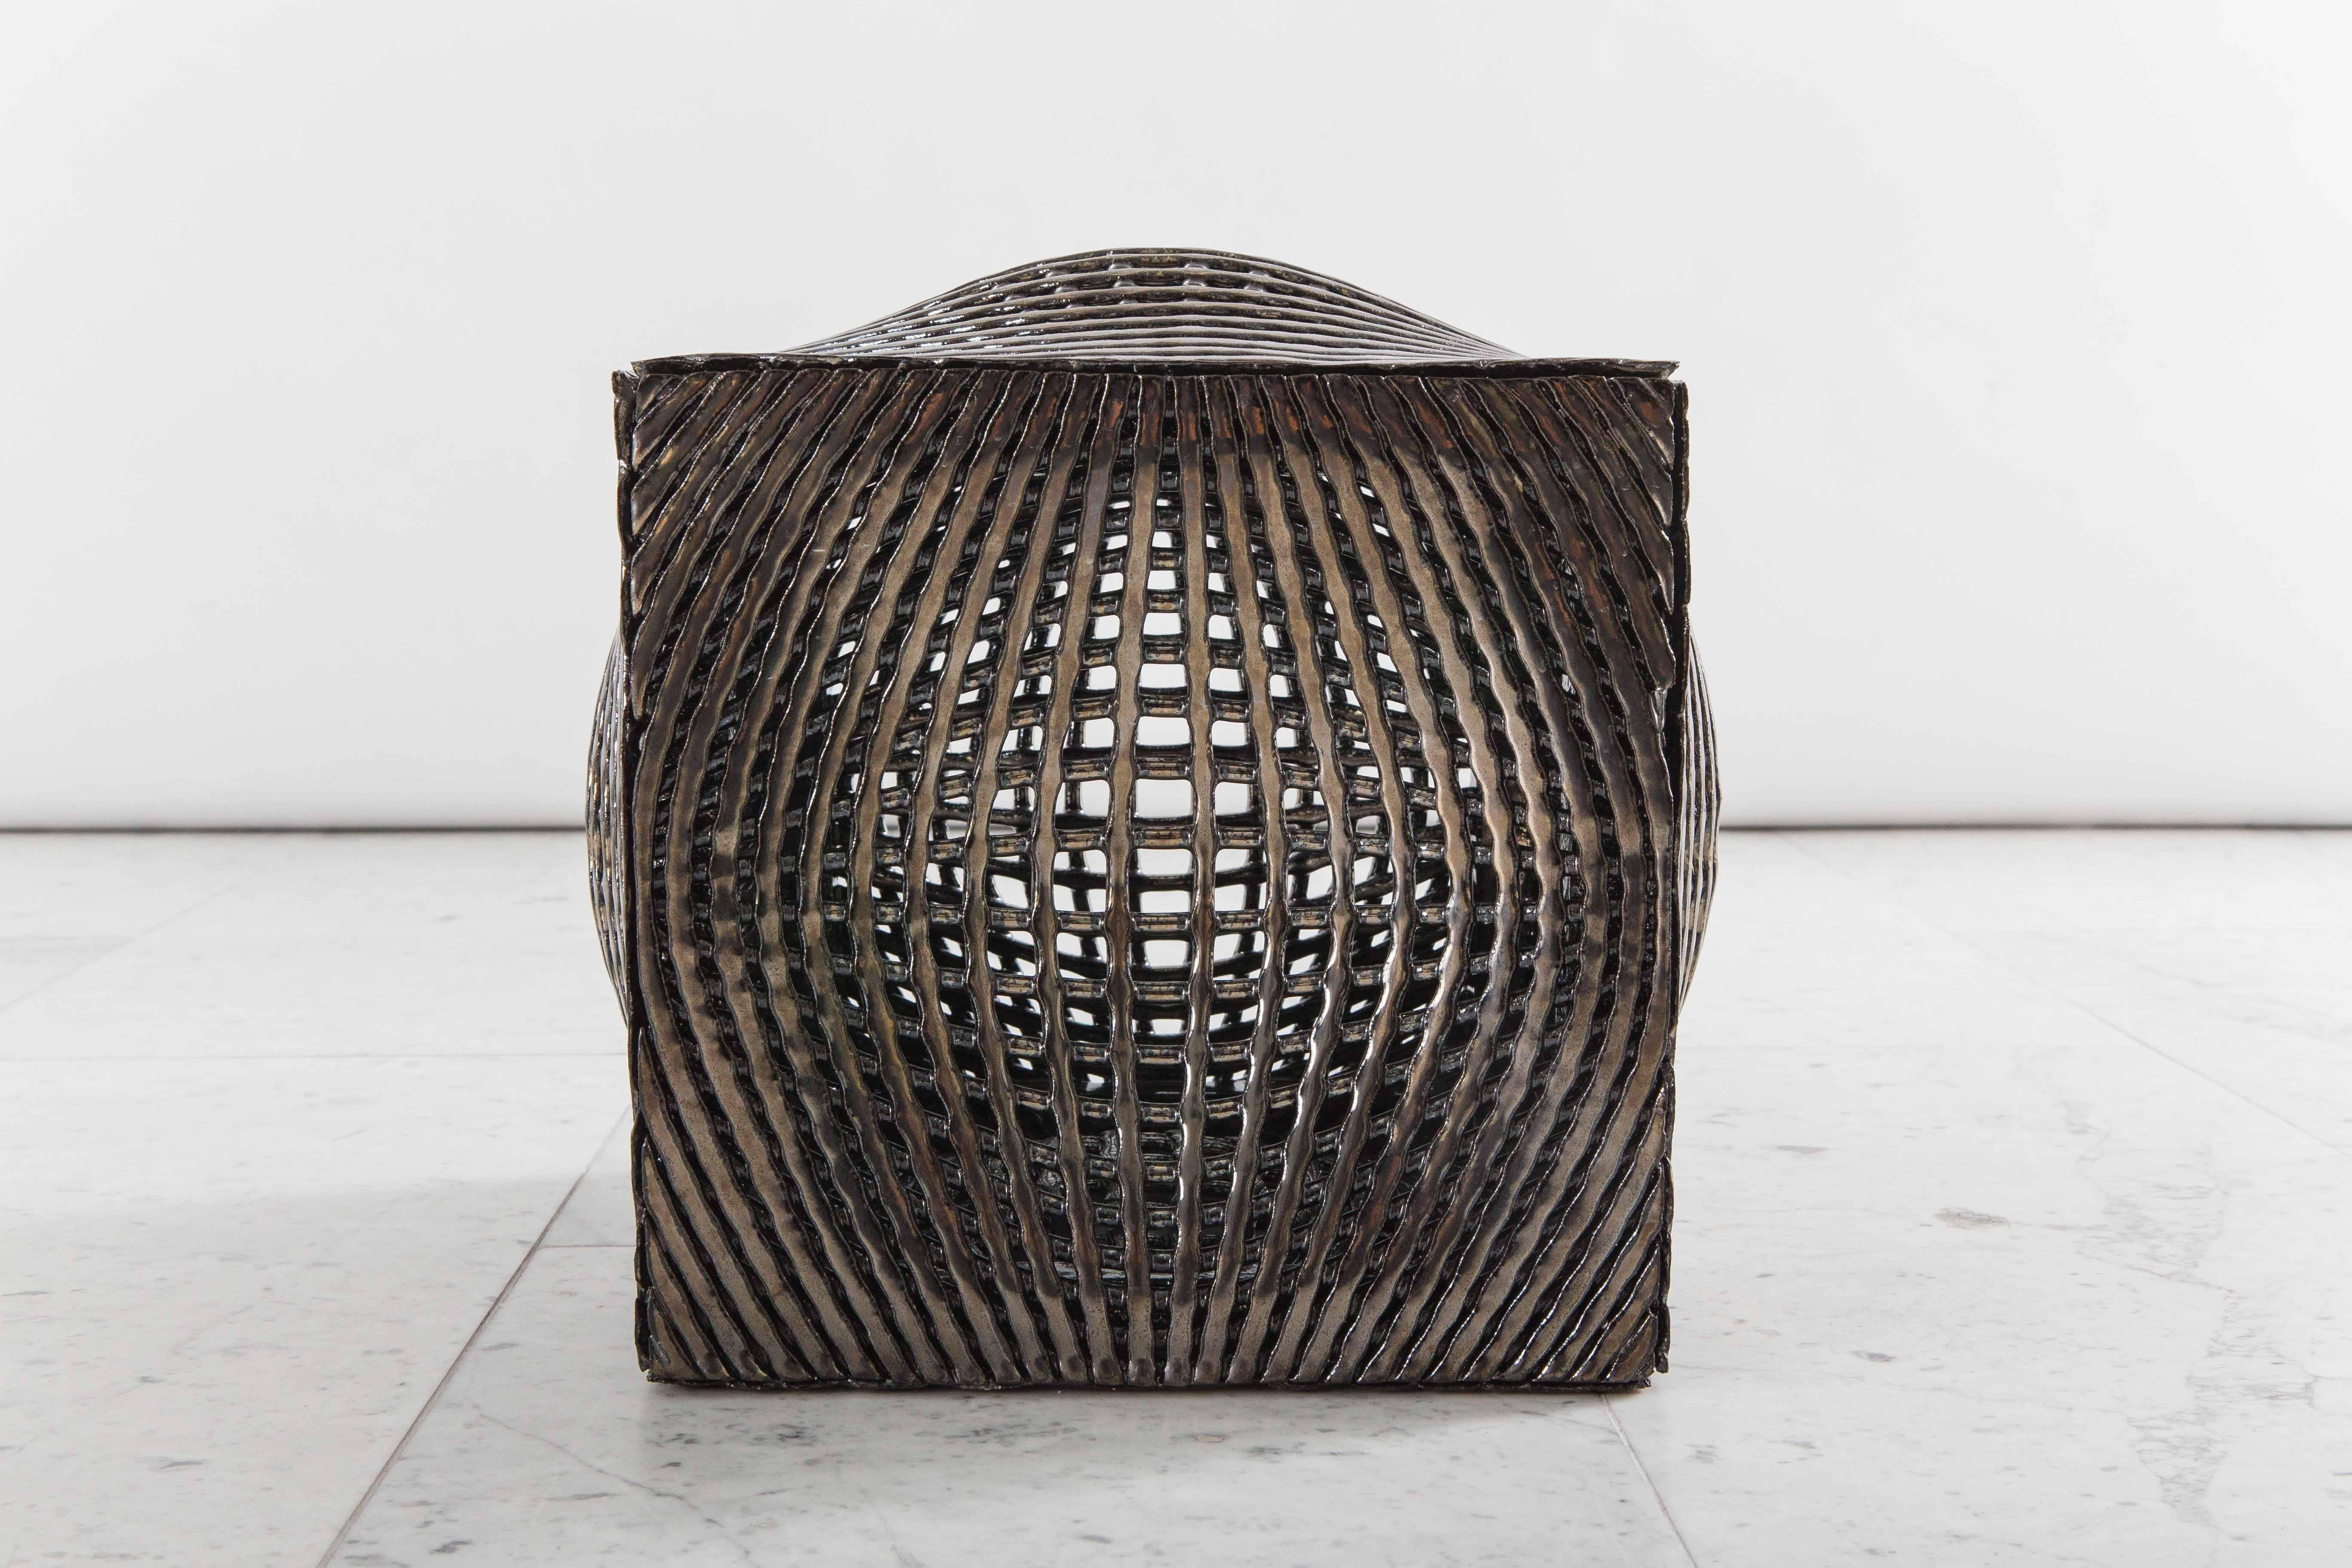 Colleen Carlson fuses together traditional ceramic techniques to create unique sculptures that emphasize texture, geometry, and light. The metallic cube, a tabletop objet d’art, is made of sculpture clay that been coated in a metallic glaze.